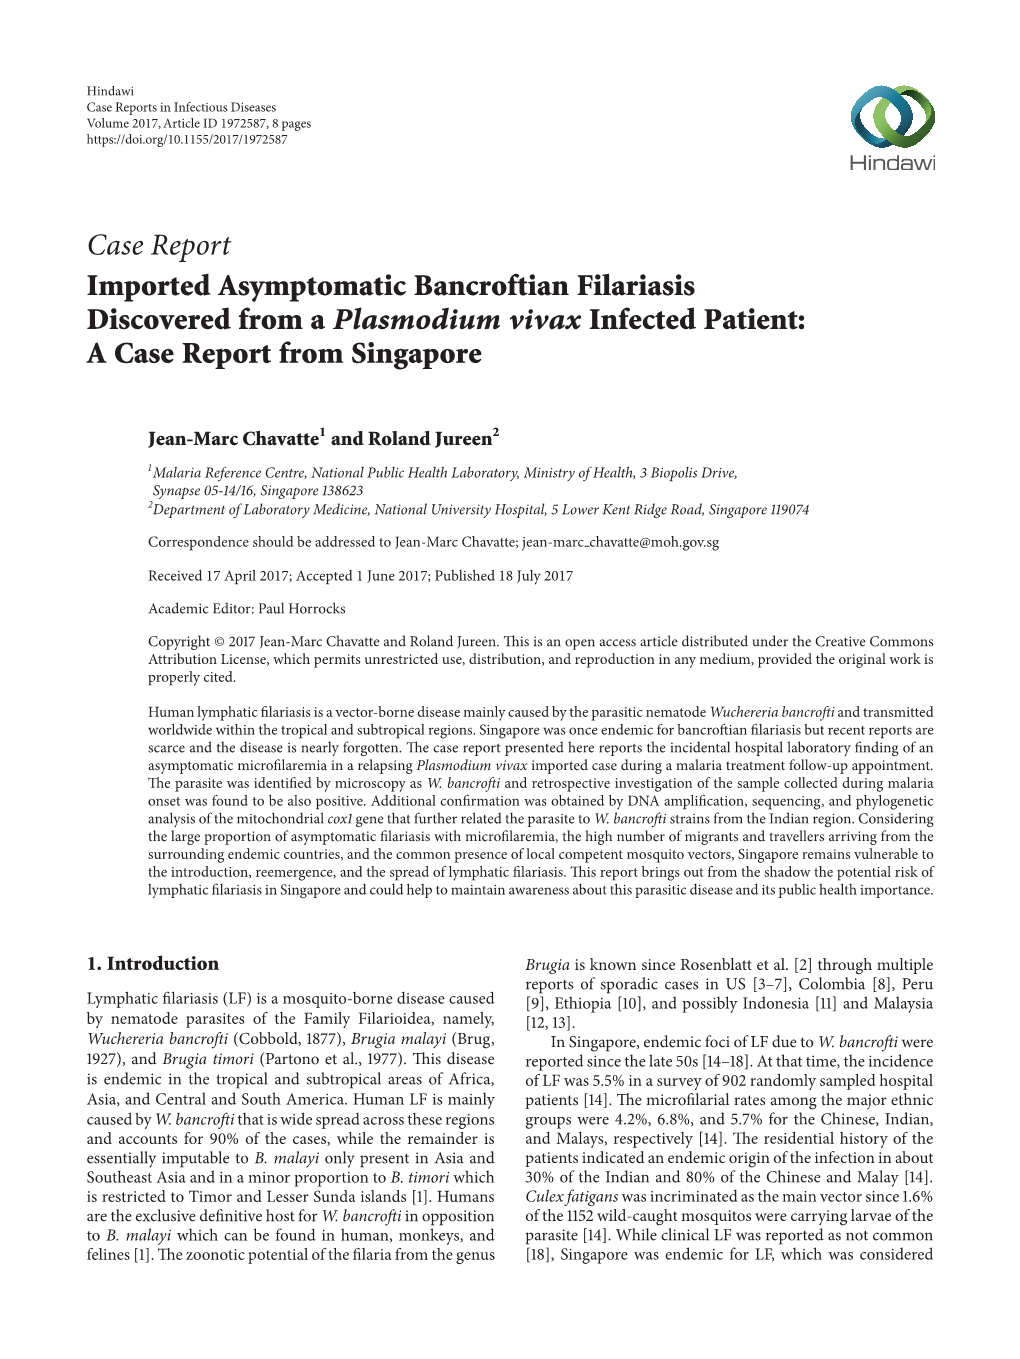 Imported Asymptomatic Bancroftian Filariasis Discovered from a Plasmodium Vivax Infected Patient: a Case Report from Singapore